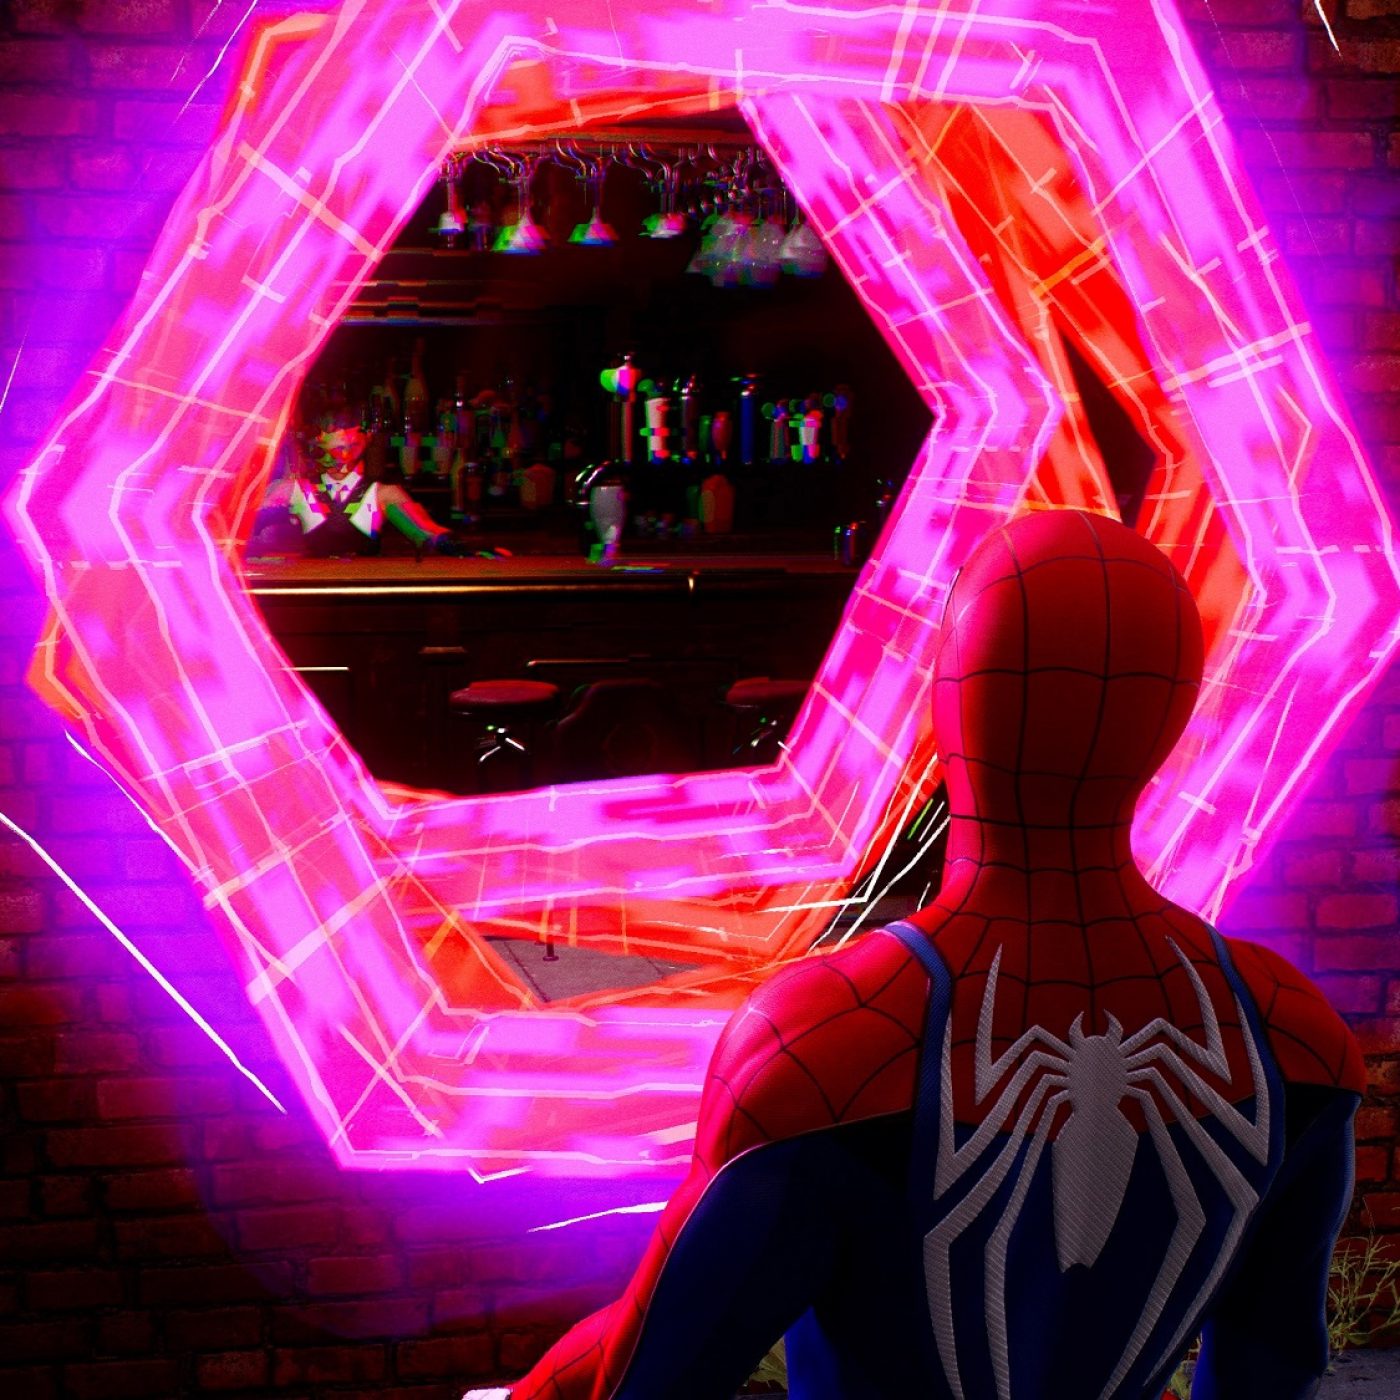 PlayStation Showcase 2023: Some Hits and Big Misses , Spiderman 2